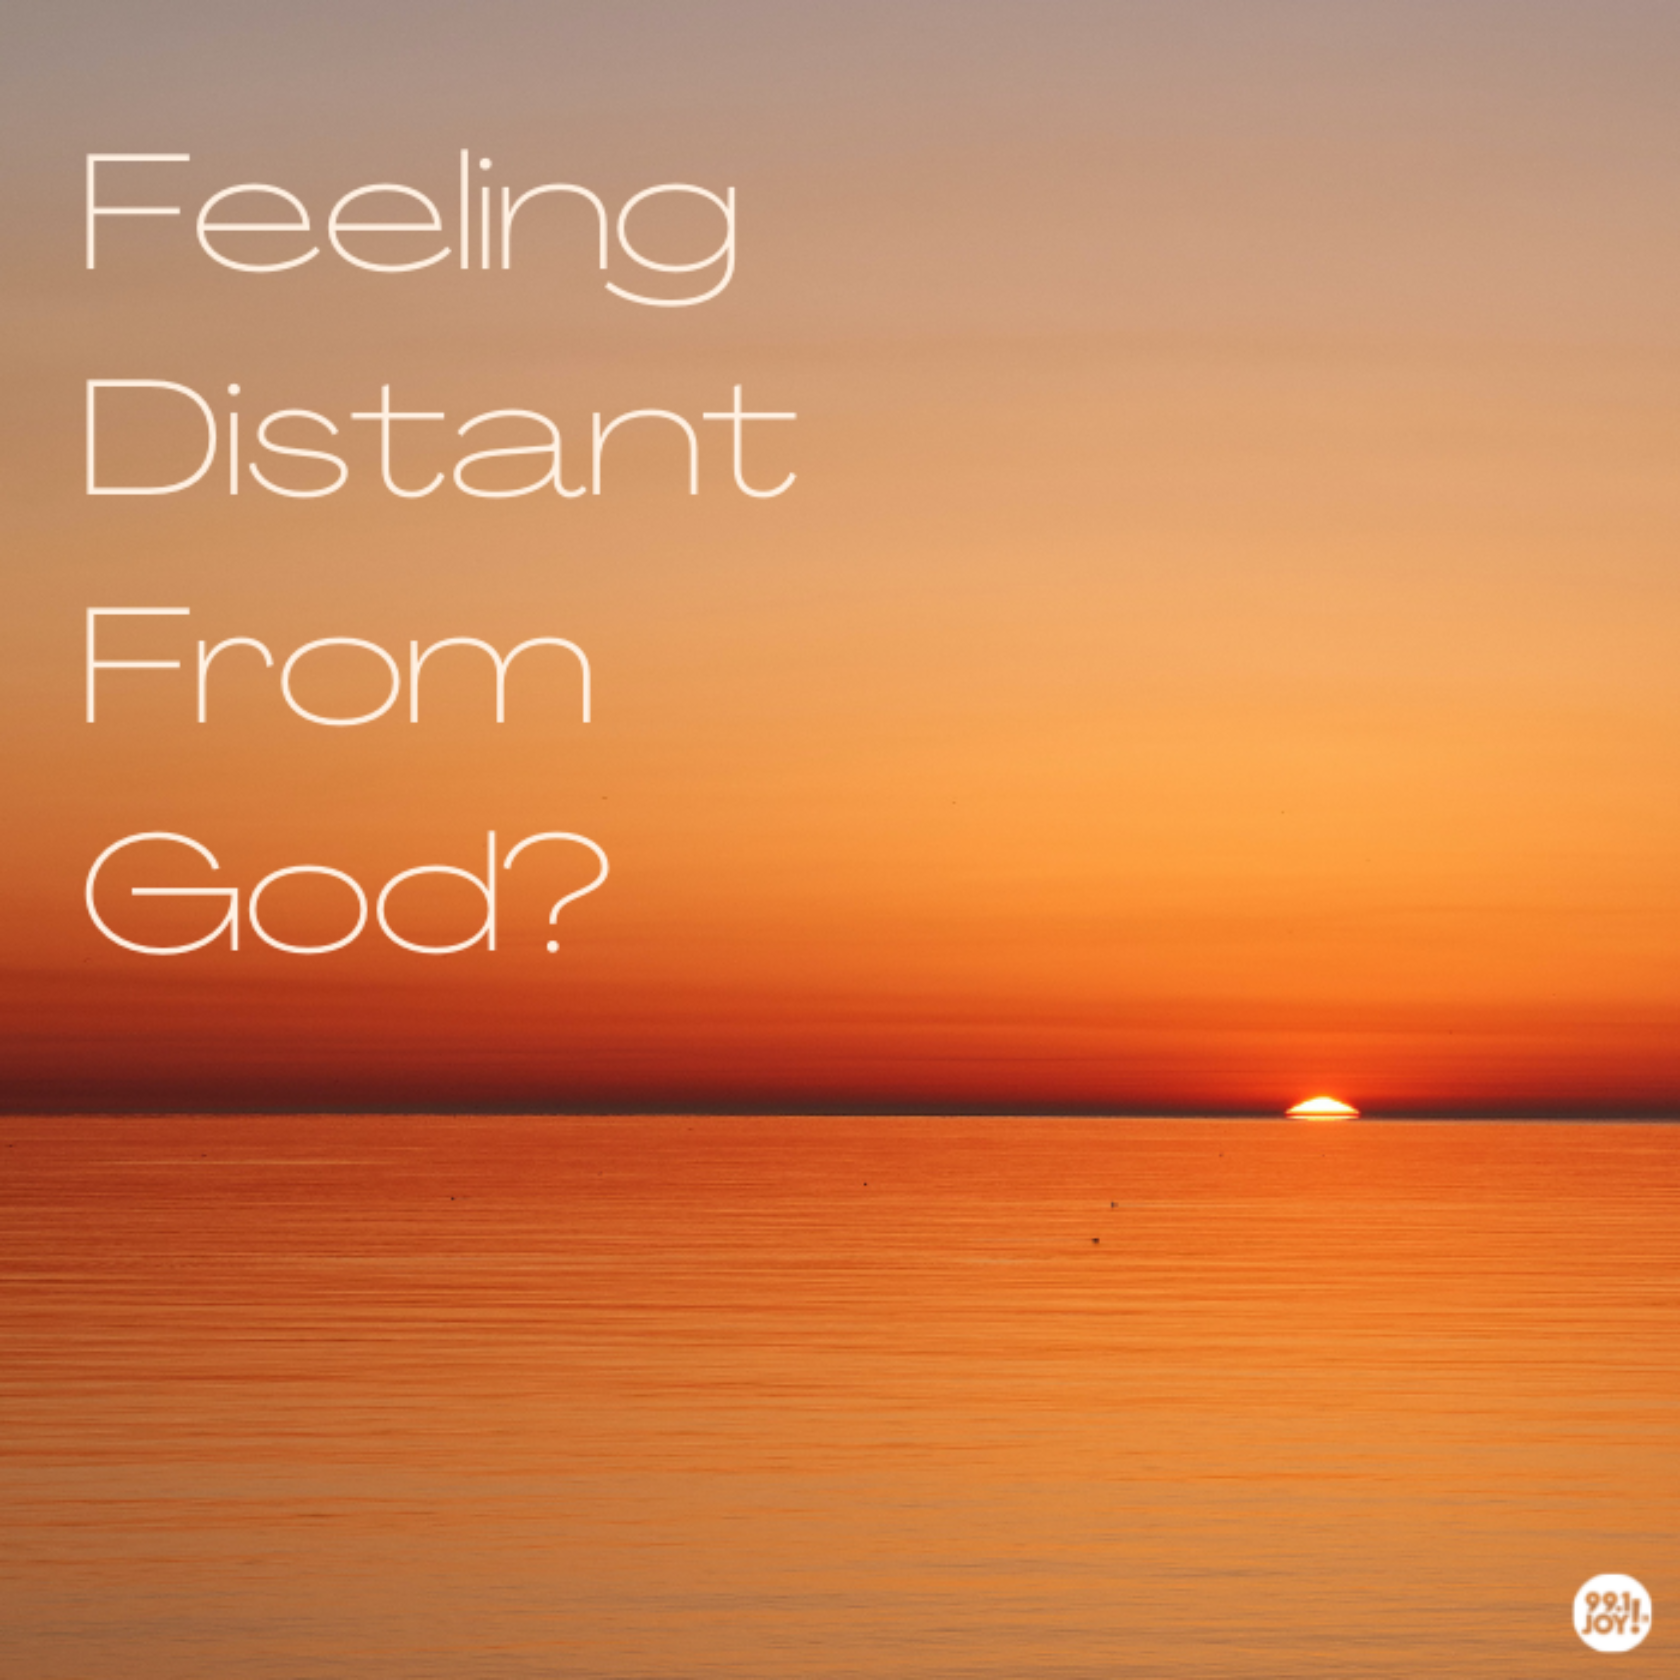 Feeling Distant From God?